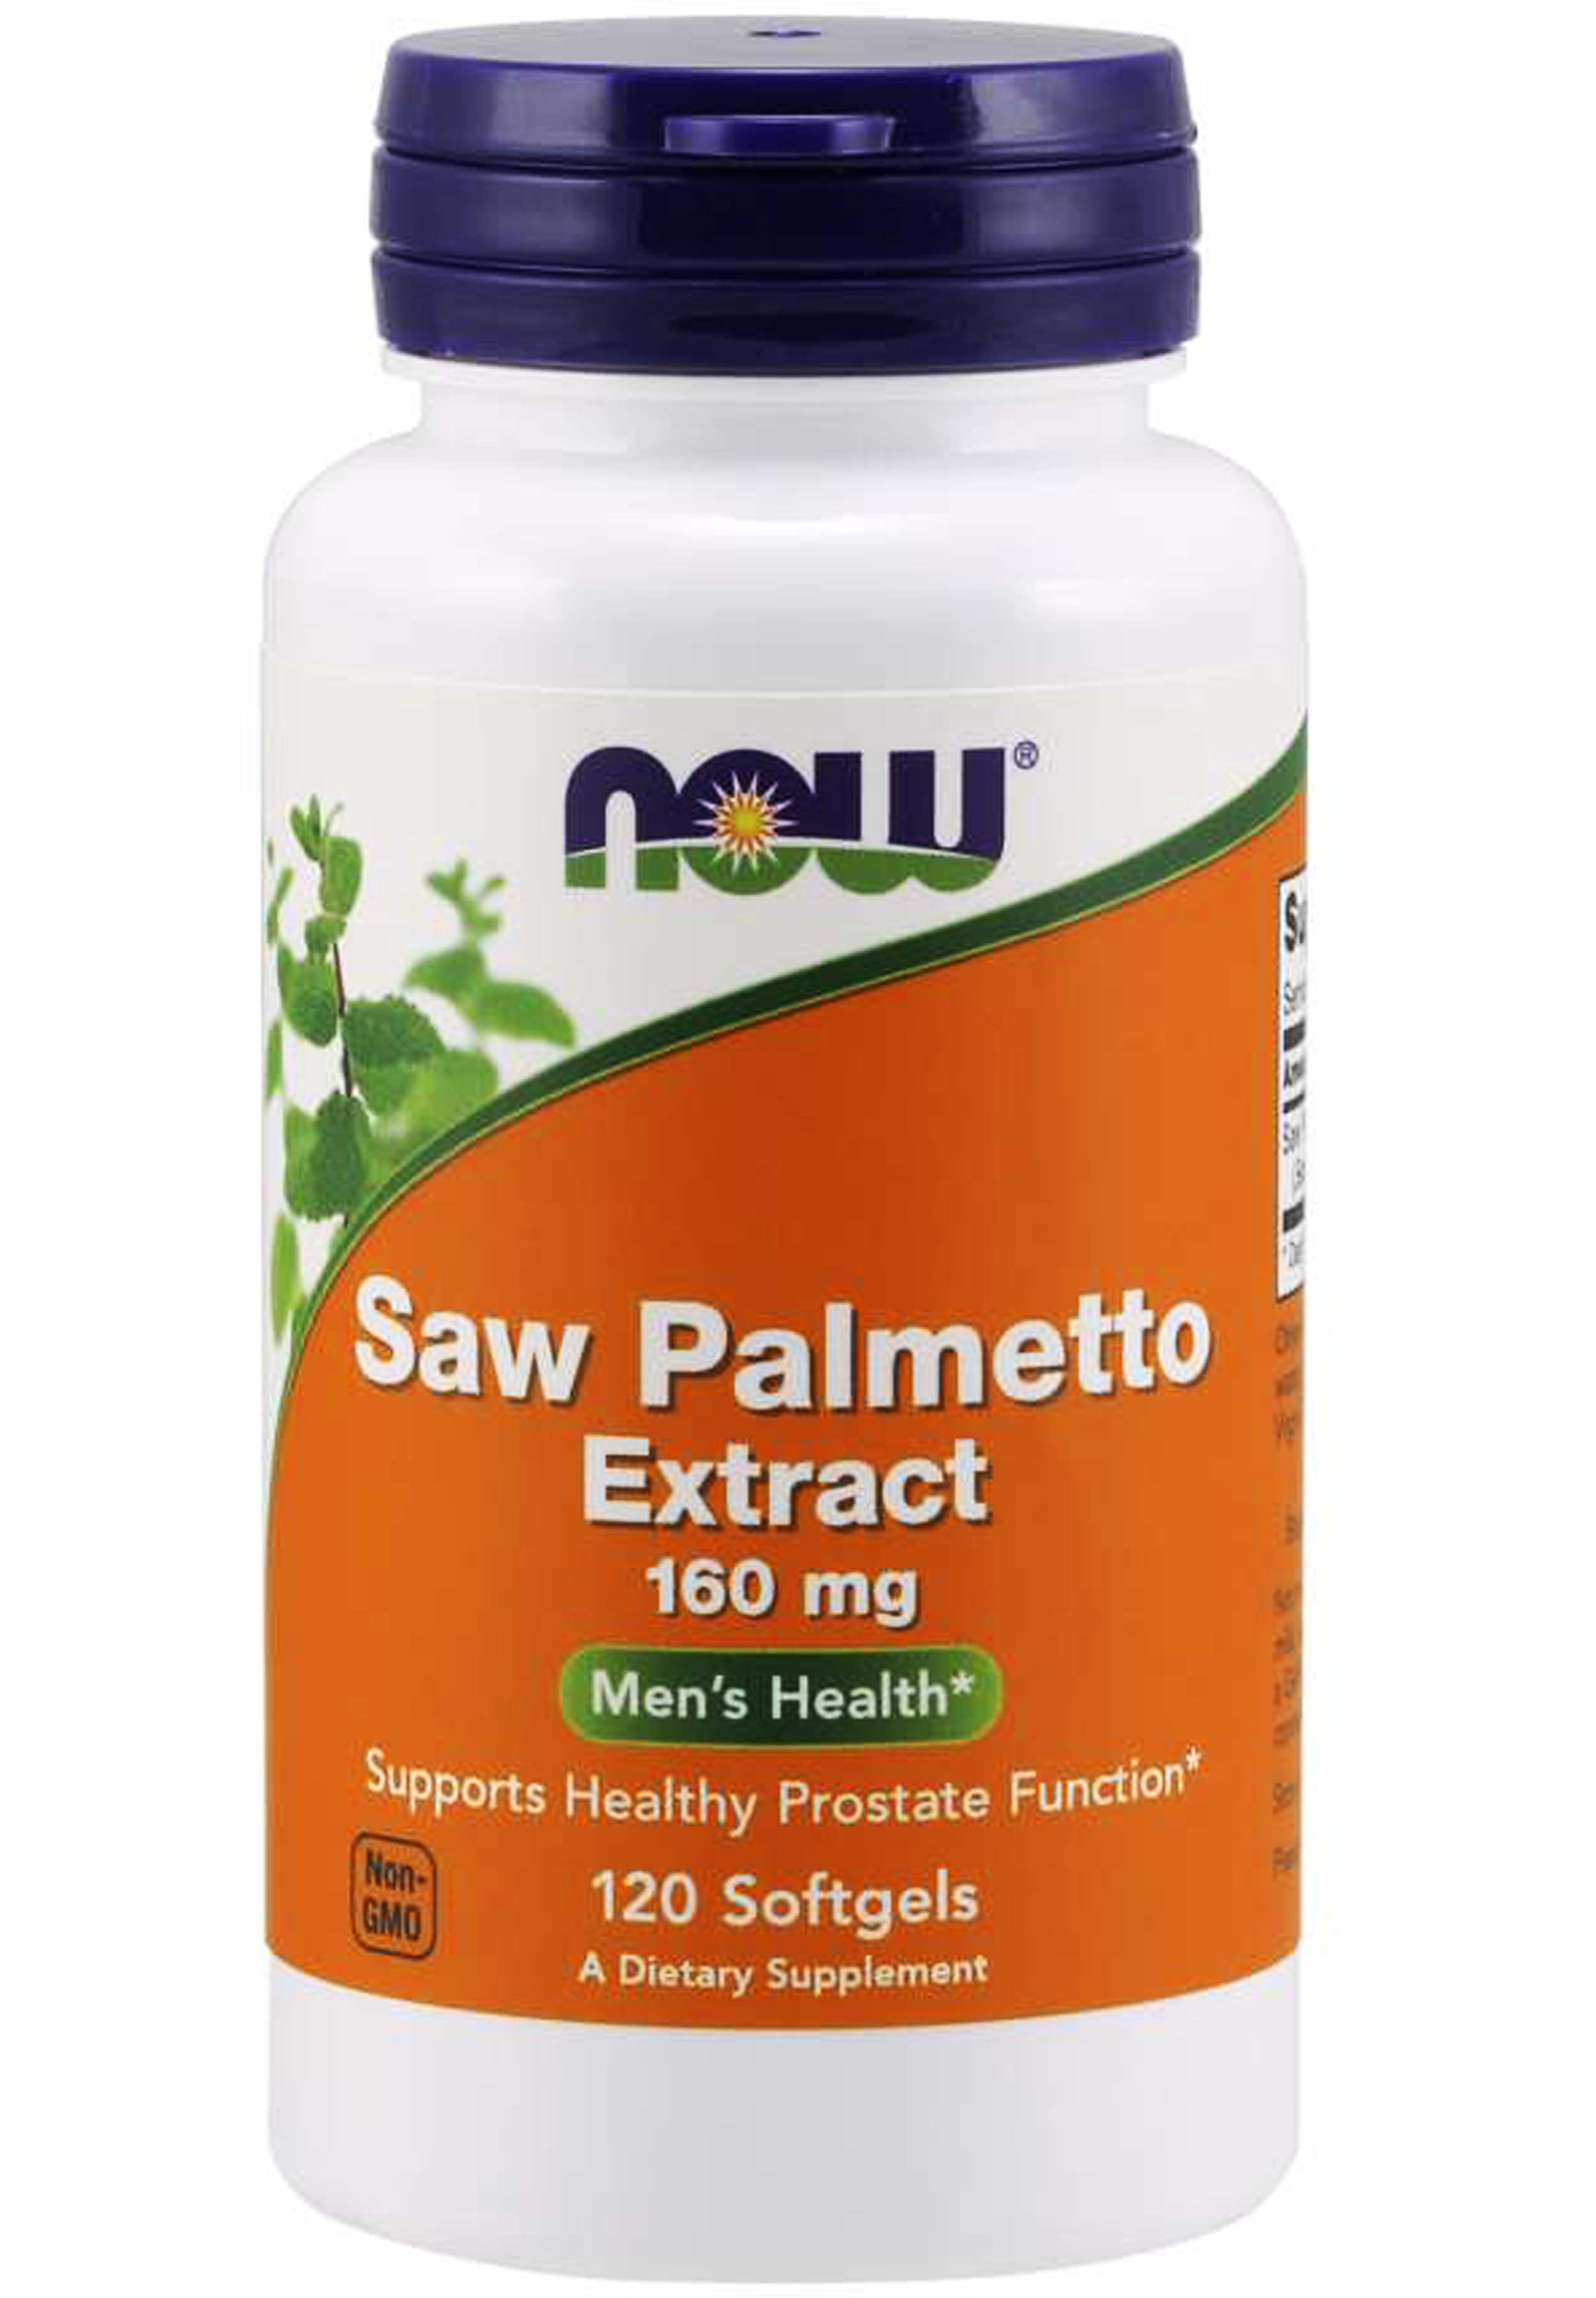 NOW Saw Palmetto Extract 160 mg